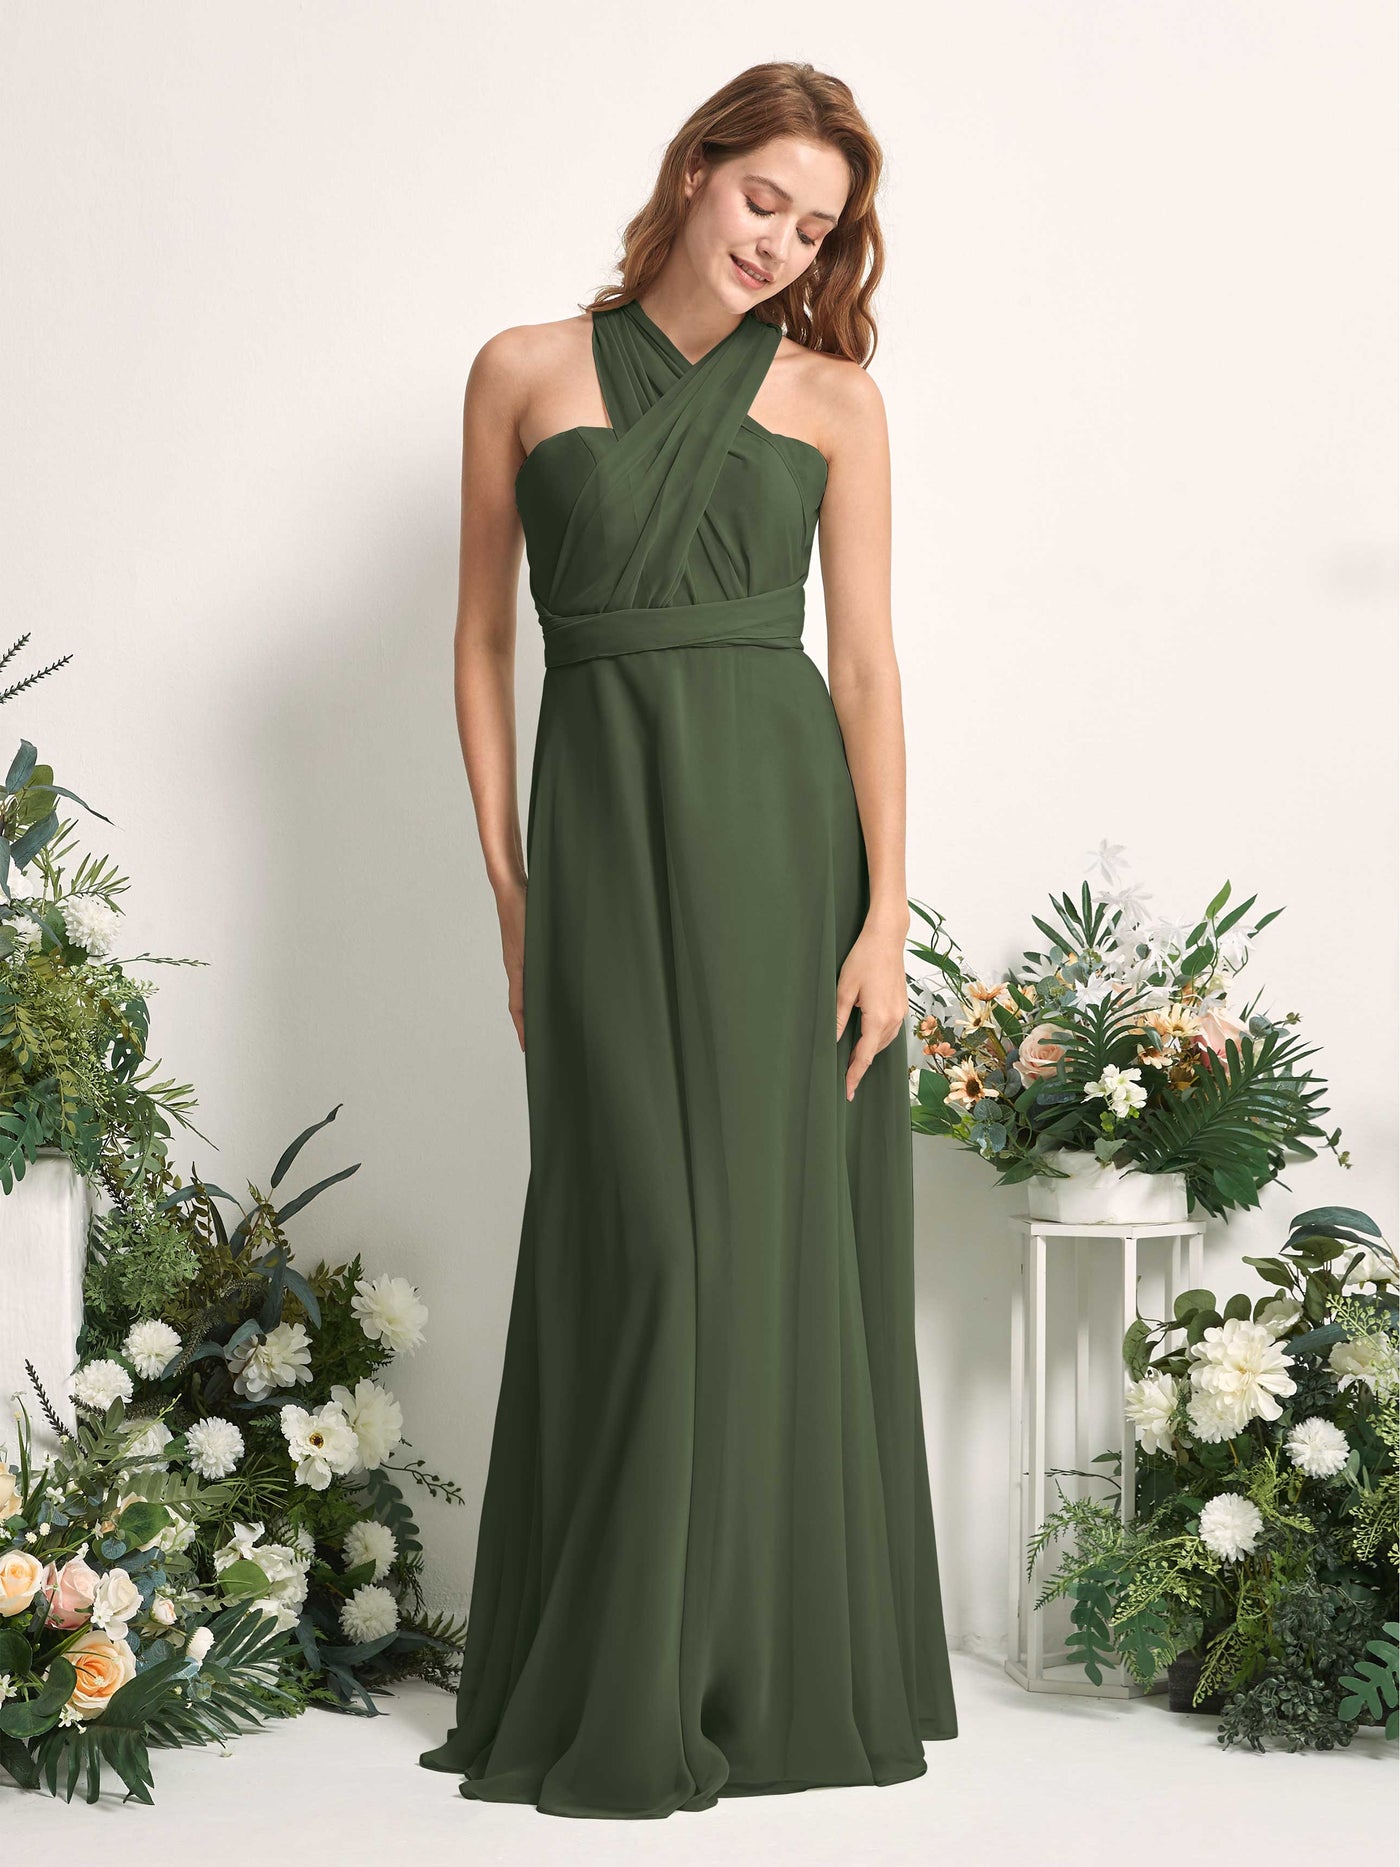 Bridesmaid Dress A-line Chiffon Halter Full Length Short Sleeves Wedding Party Dress - Martini Olive (81226307)#color_martini-olive